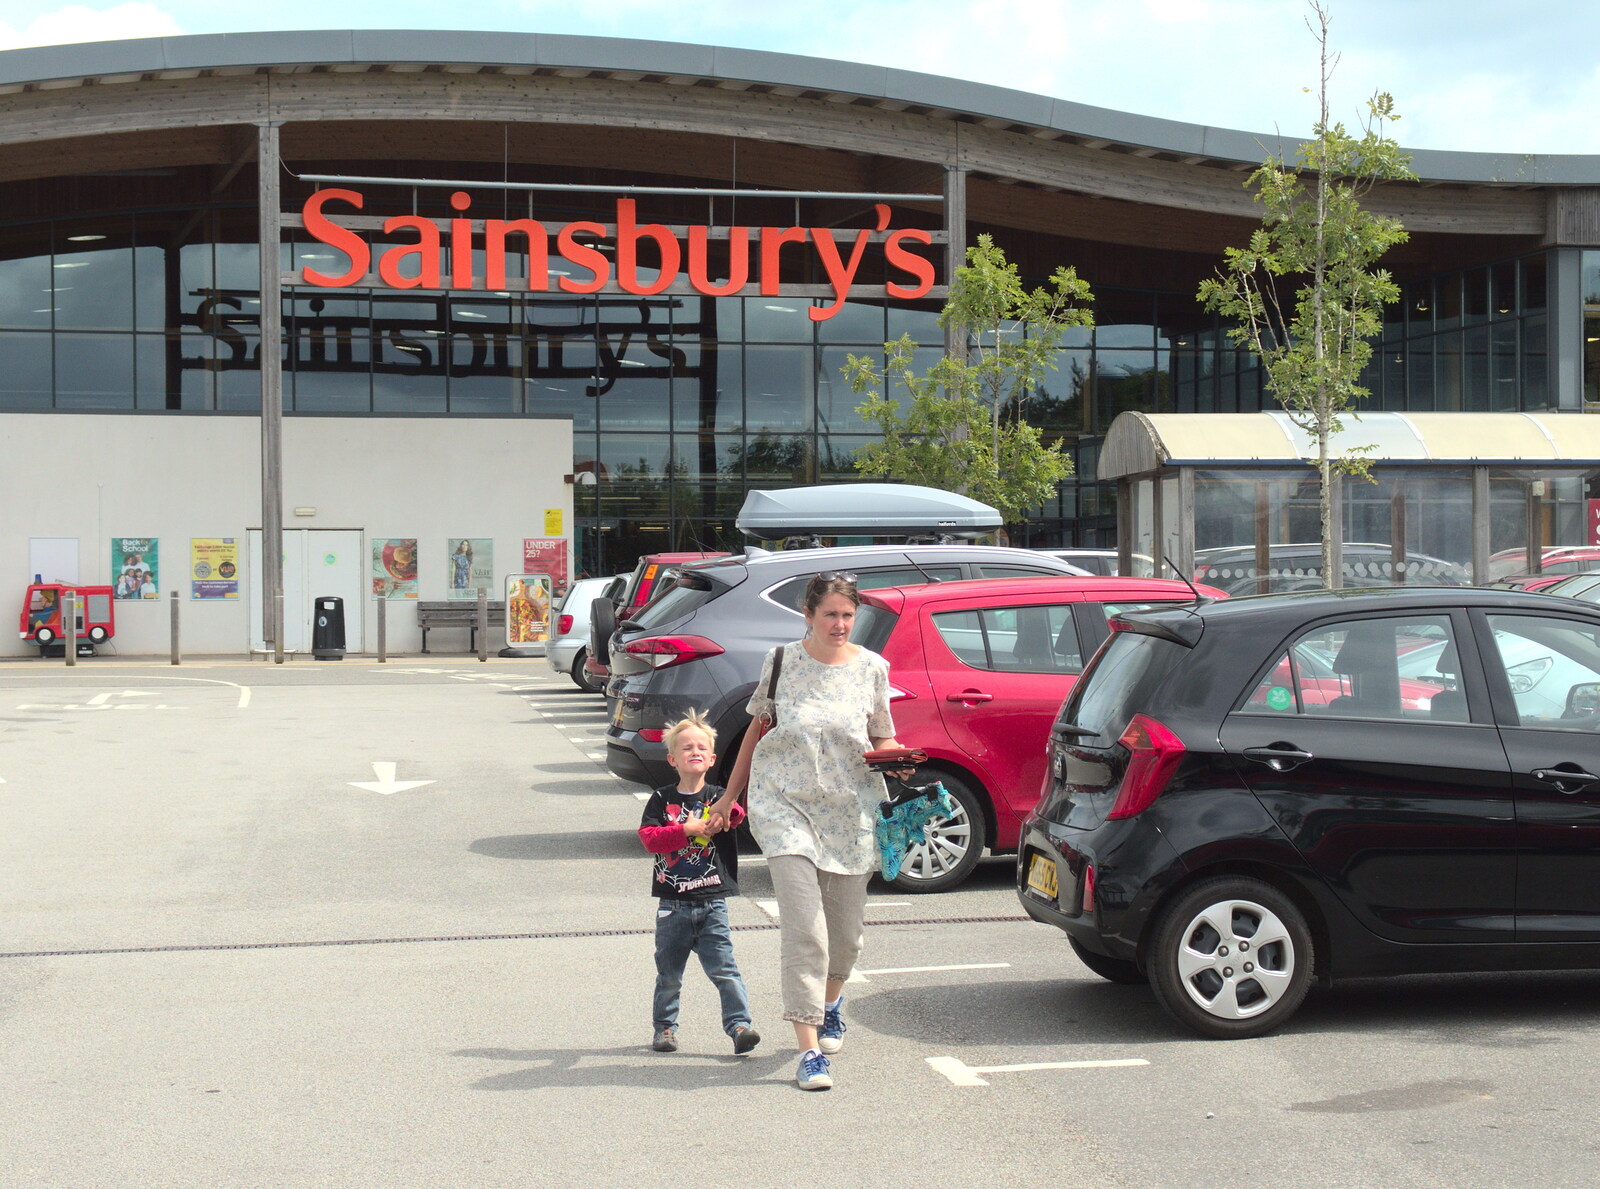 Harry's got a grump on at Dartmouth Sainsbury's from Camping With Sean, Ashburton, Devon - 8th August 2016